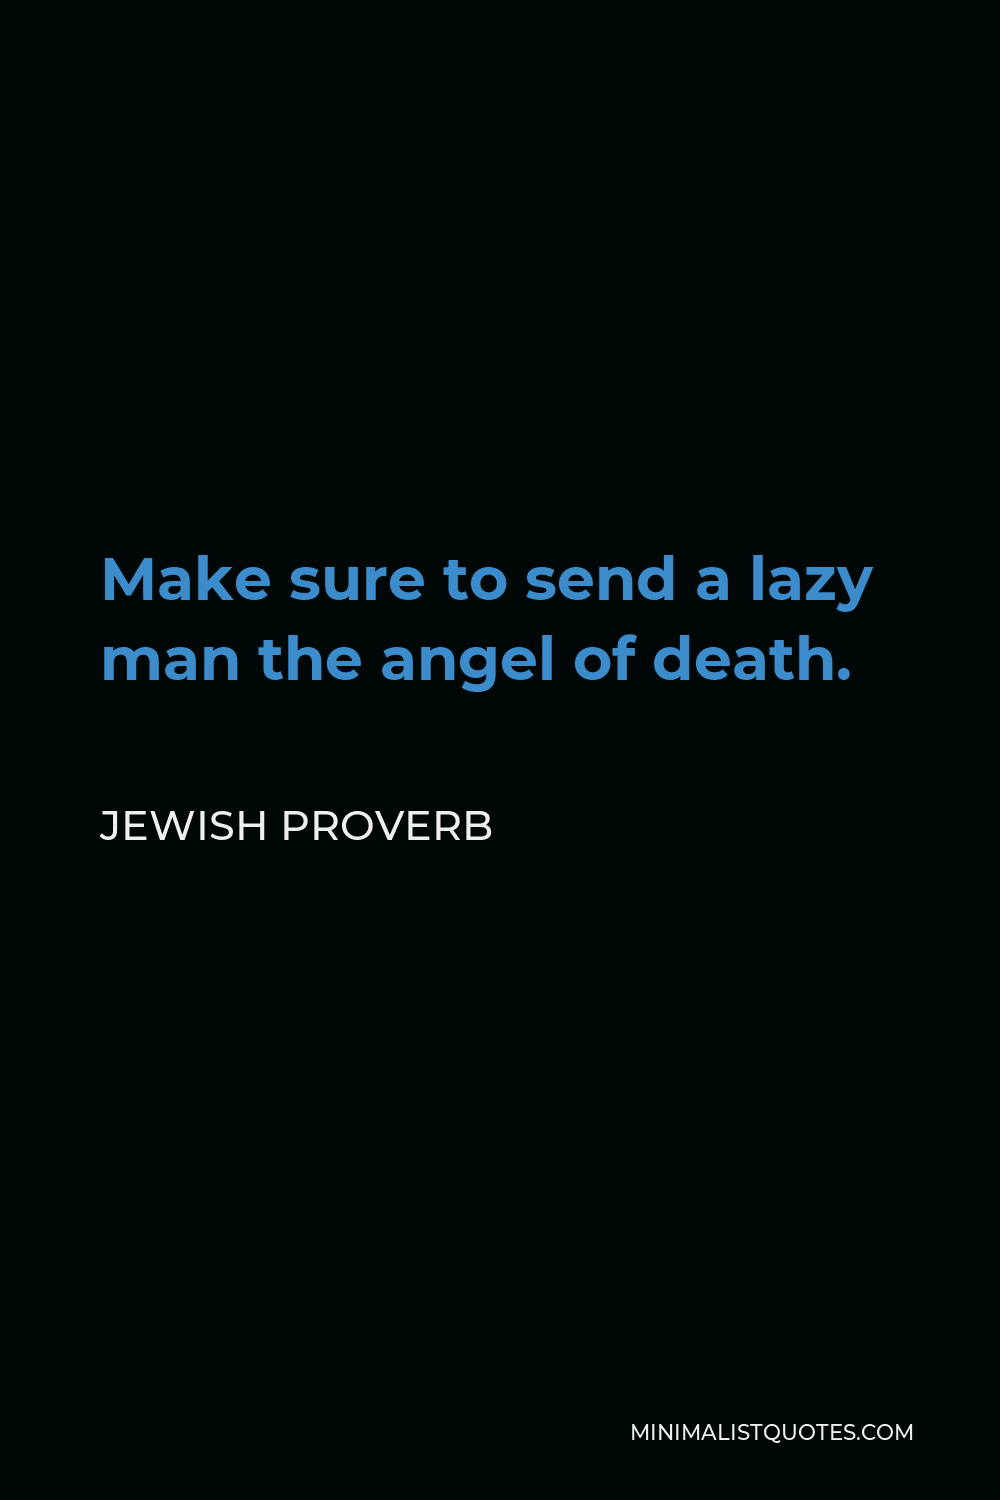 Jewish Proverb Quote - Make sure to send a lazy man the angel of death.